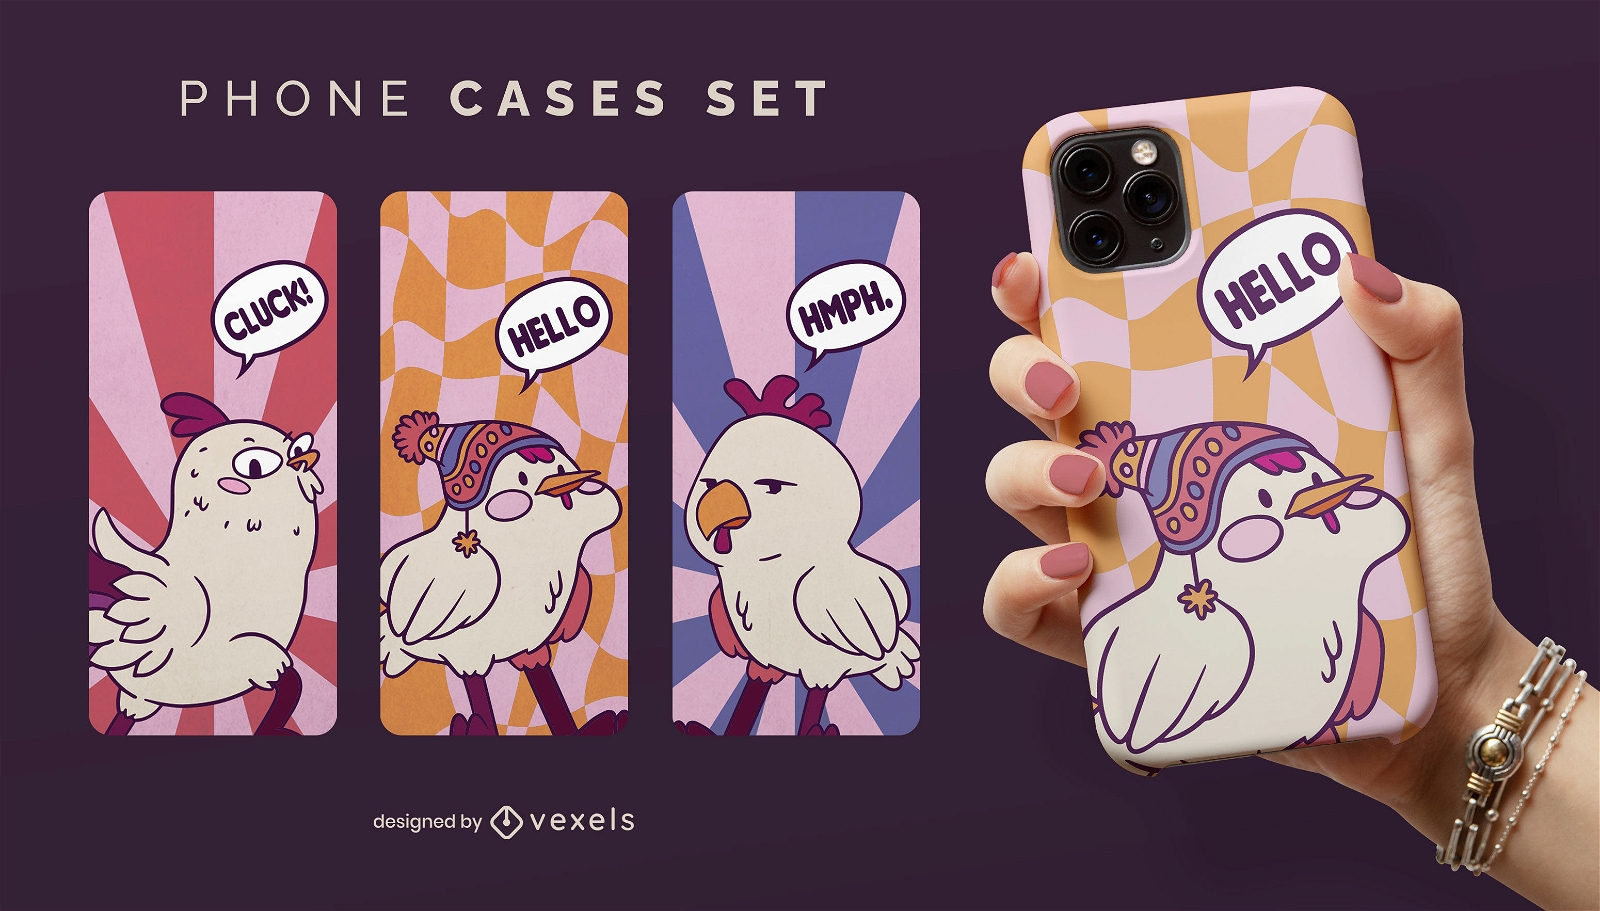 Animated chicken expressions phone cases set design